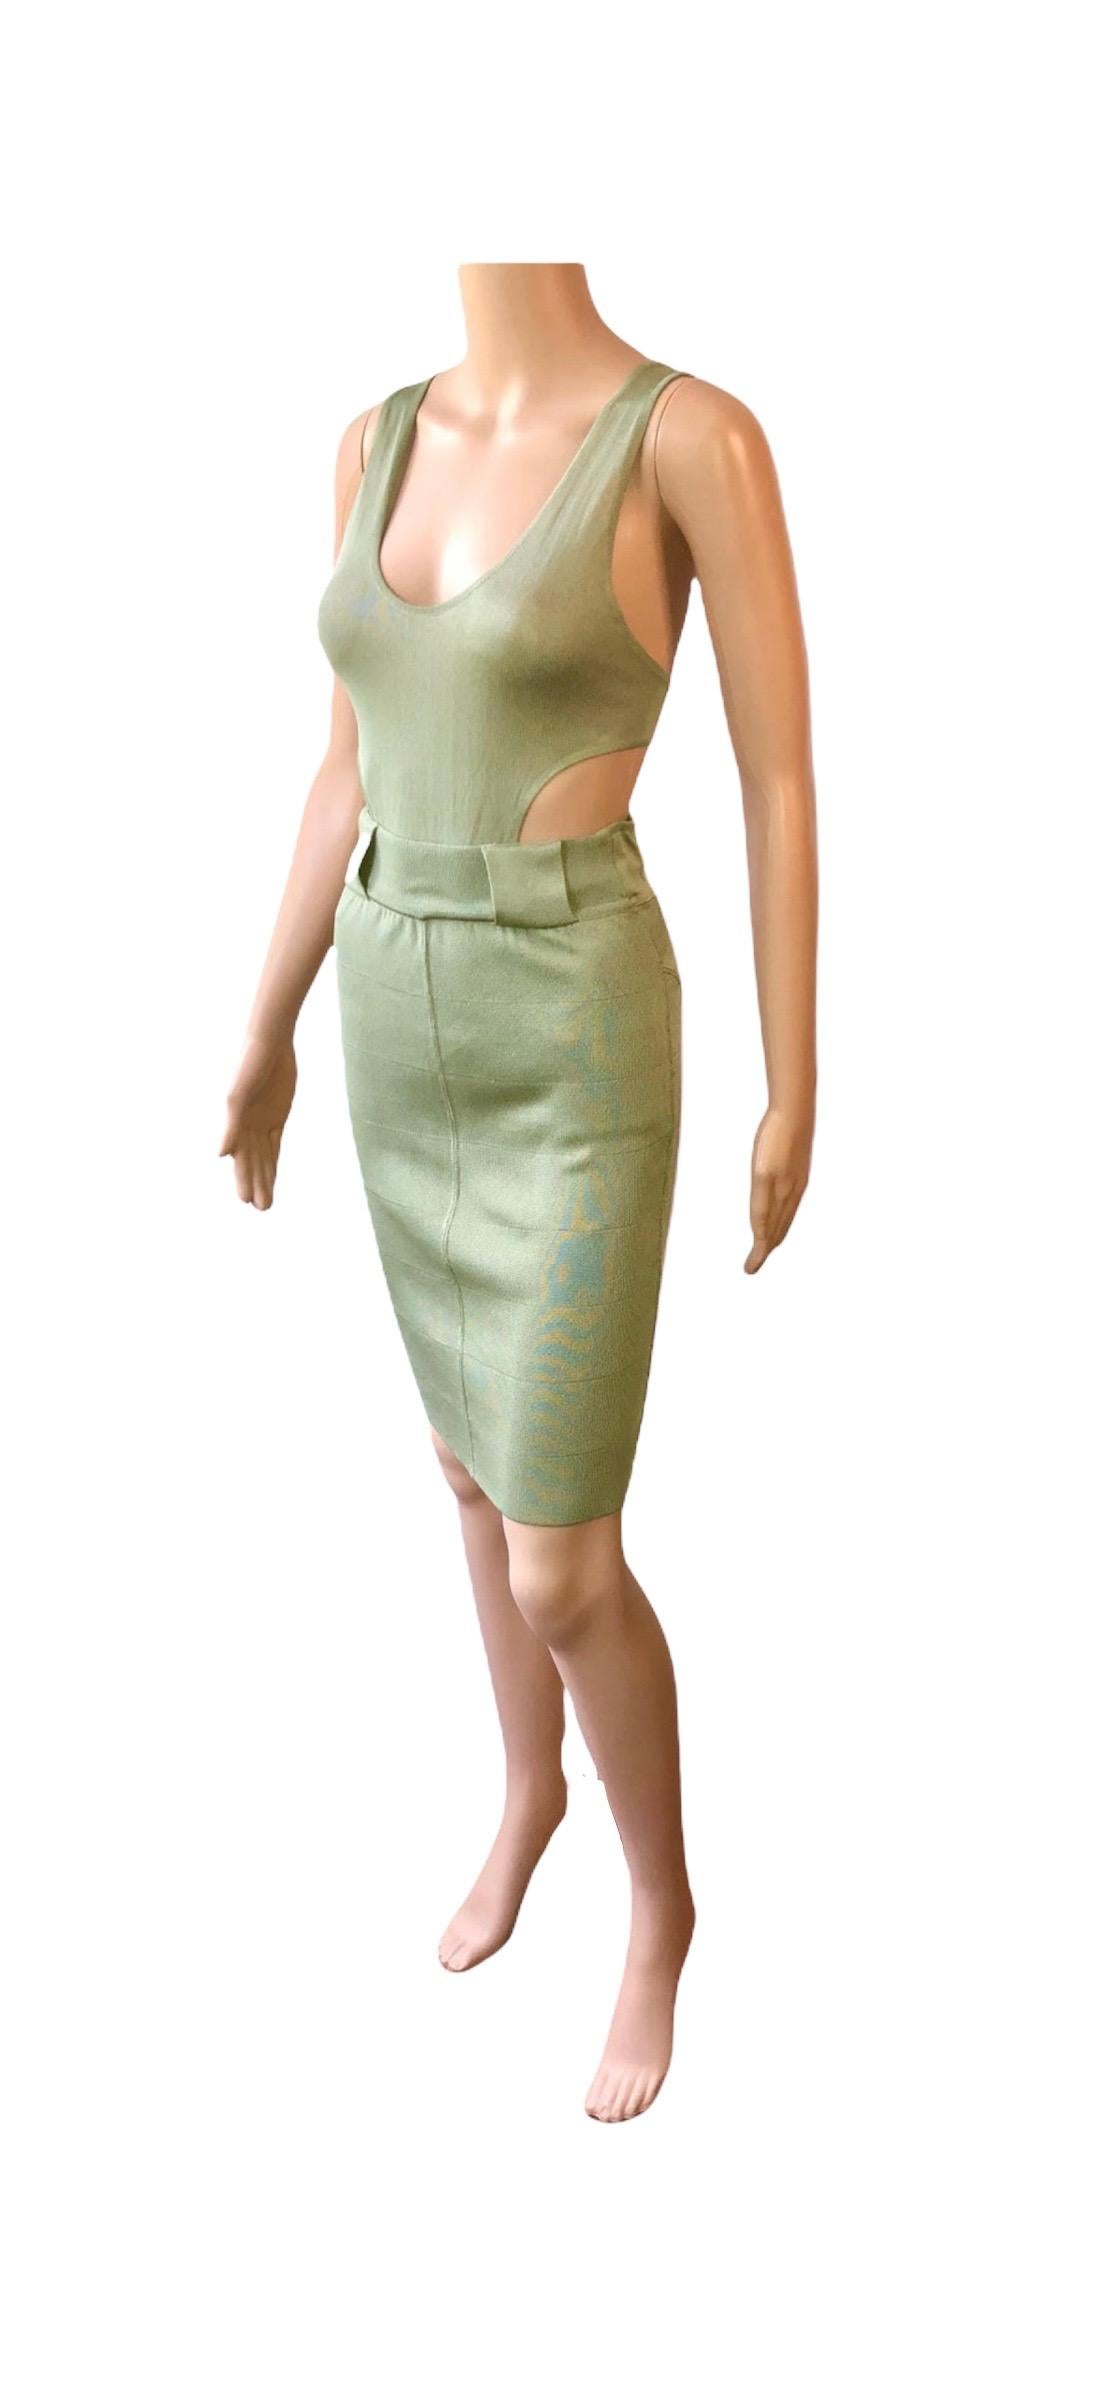 Azzedine Alaia S/S 1985 Vintage Plunged Cutout Bodycon Green Dress For Sale 7